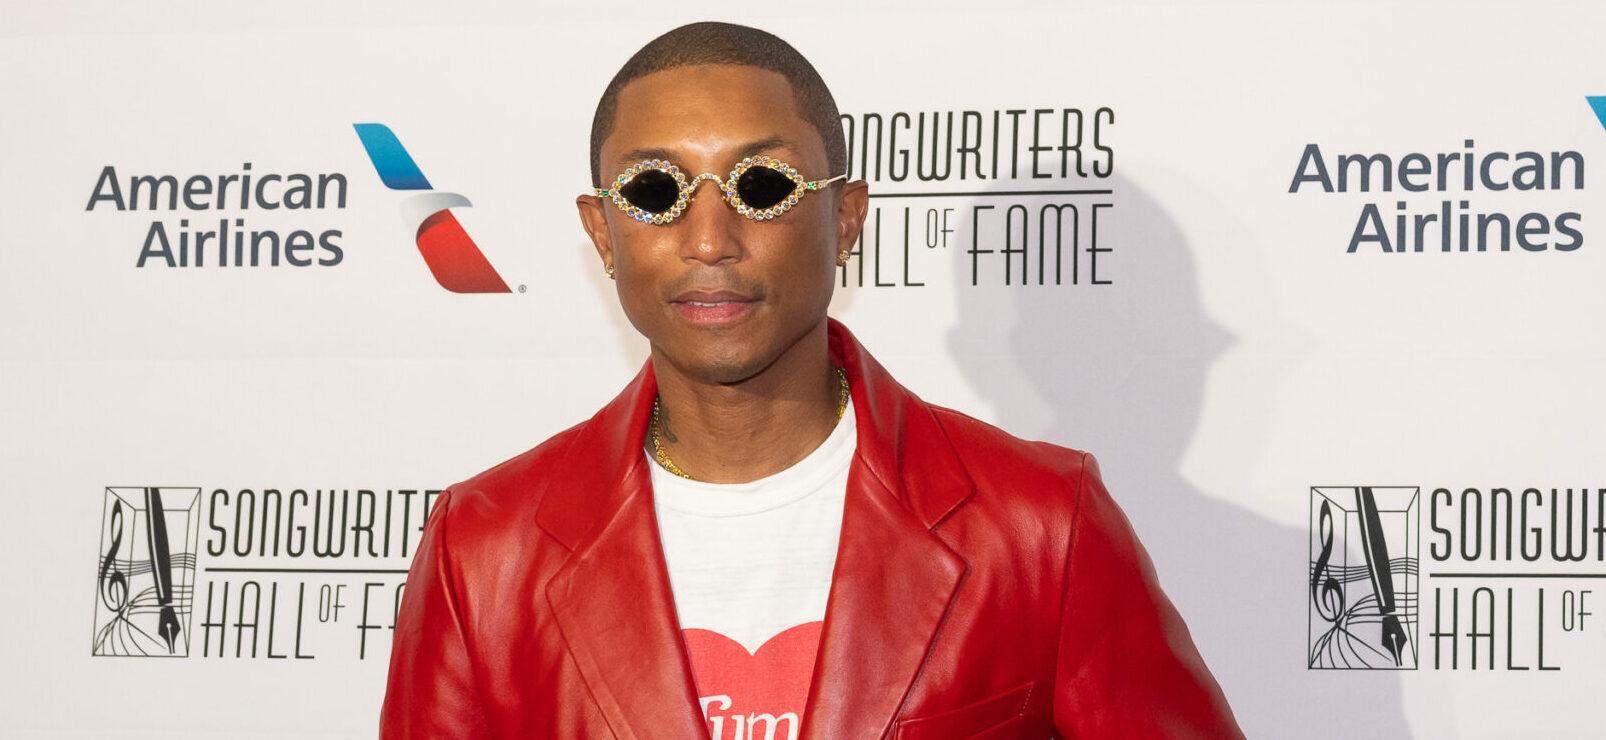 Pharrell Williams arrives on the red carpet for the Songwriters Hall of Fame 2022 51st Induction and Awards Gala at the New York Marriott Marquis Hotel in New York City on June 16, 2022.